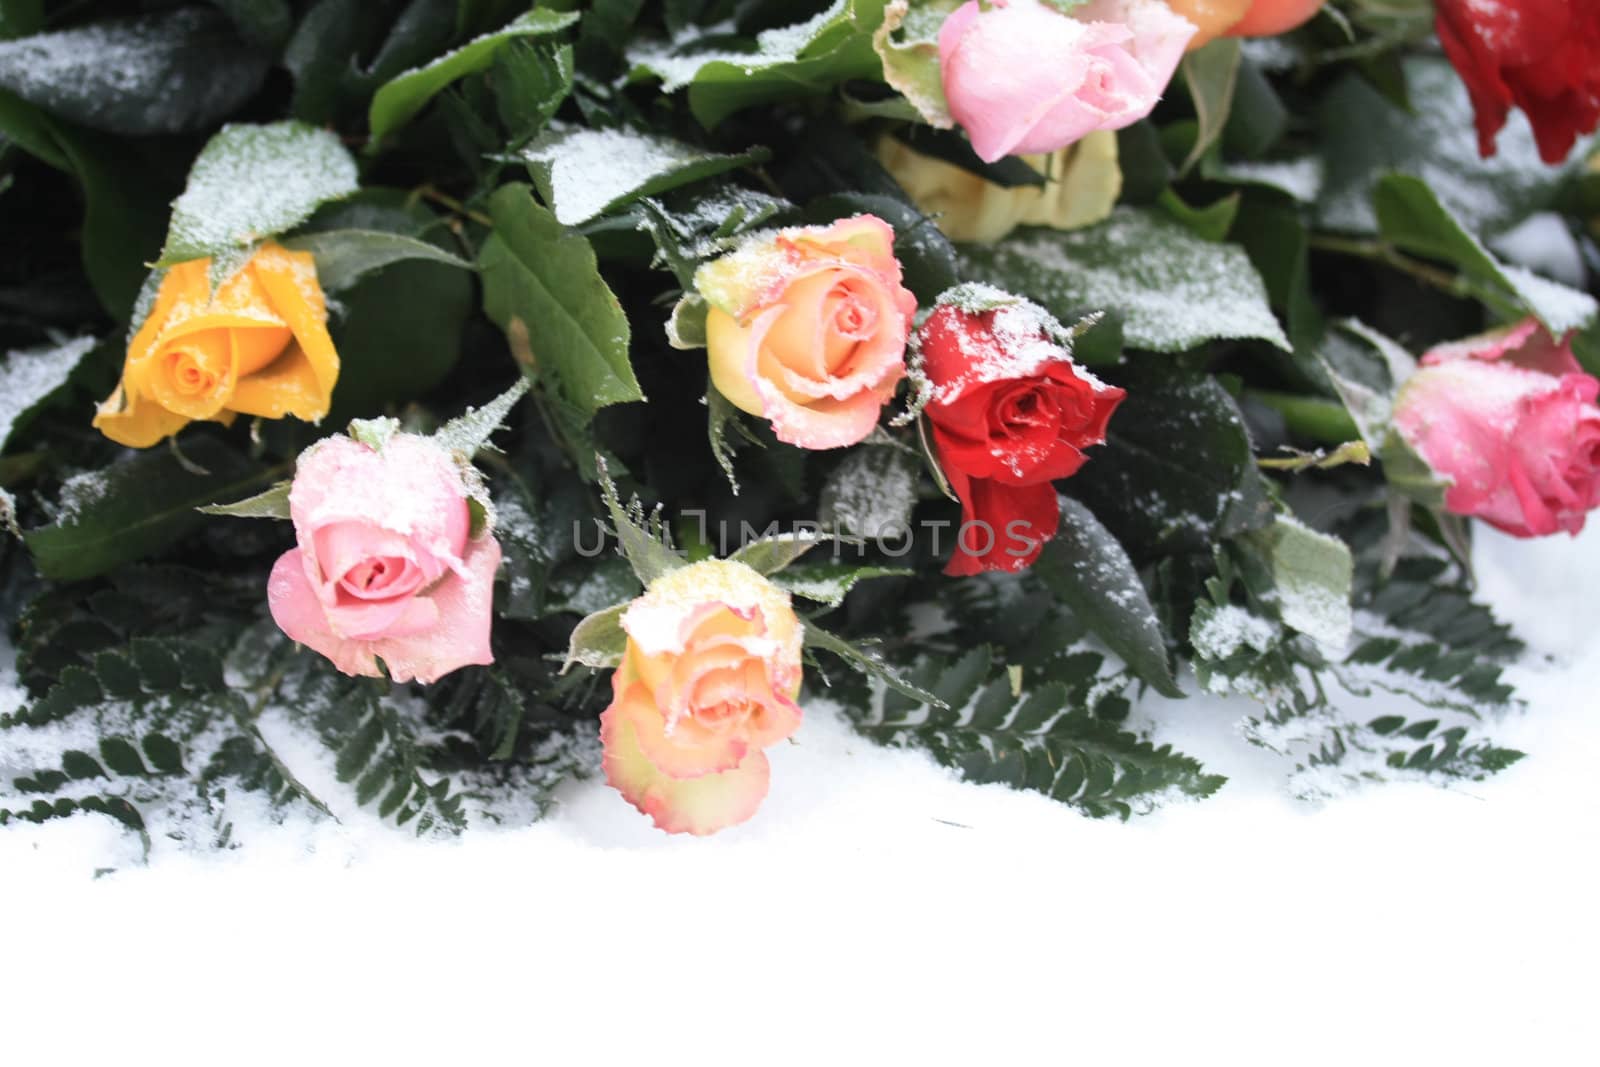 mixed rose bouquet in the snow by studioportosabbia